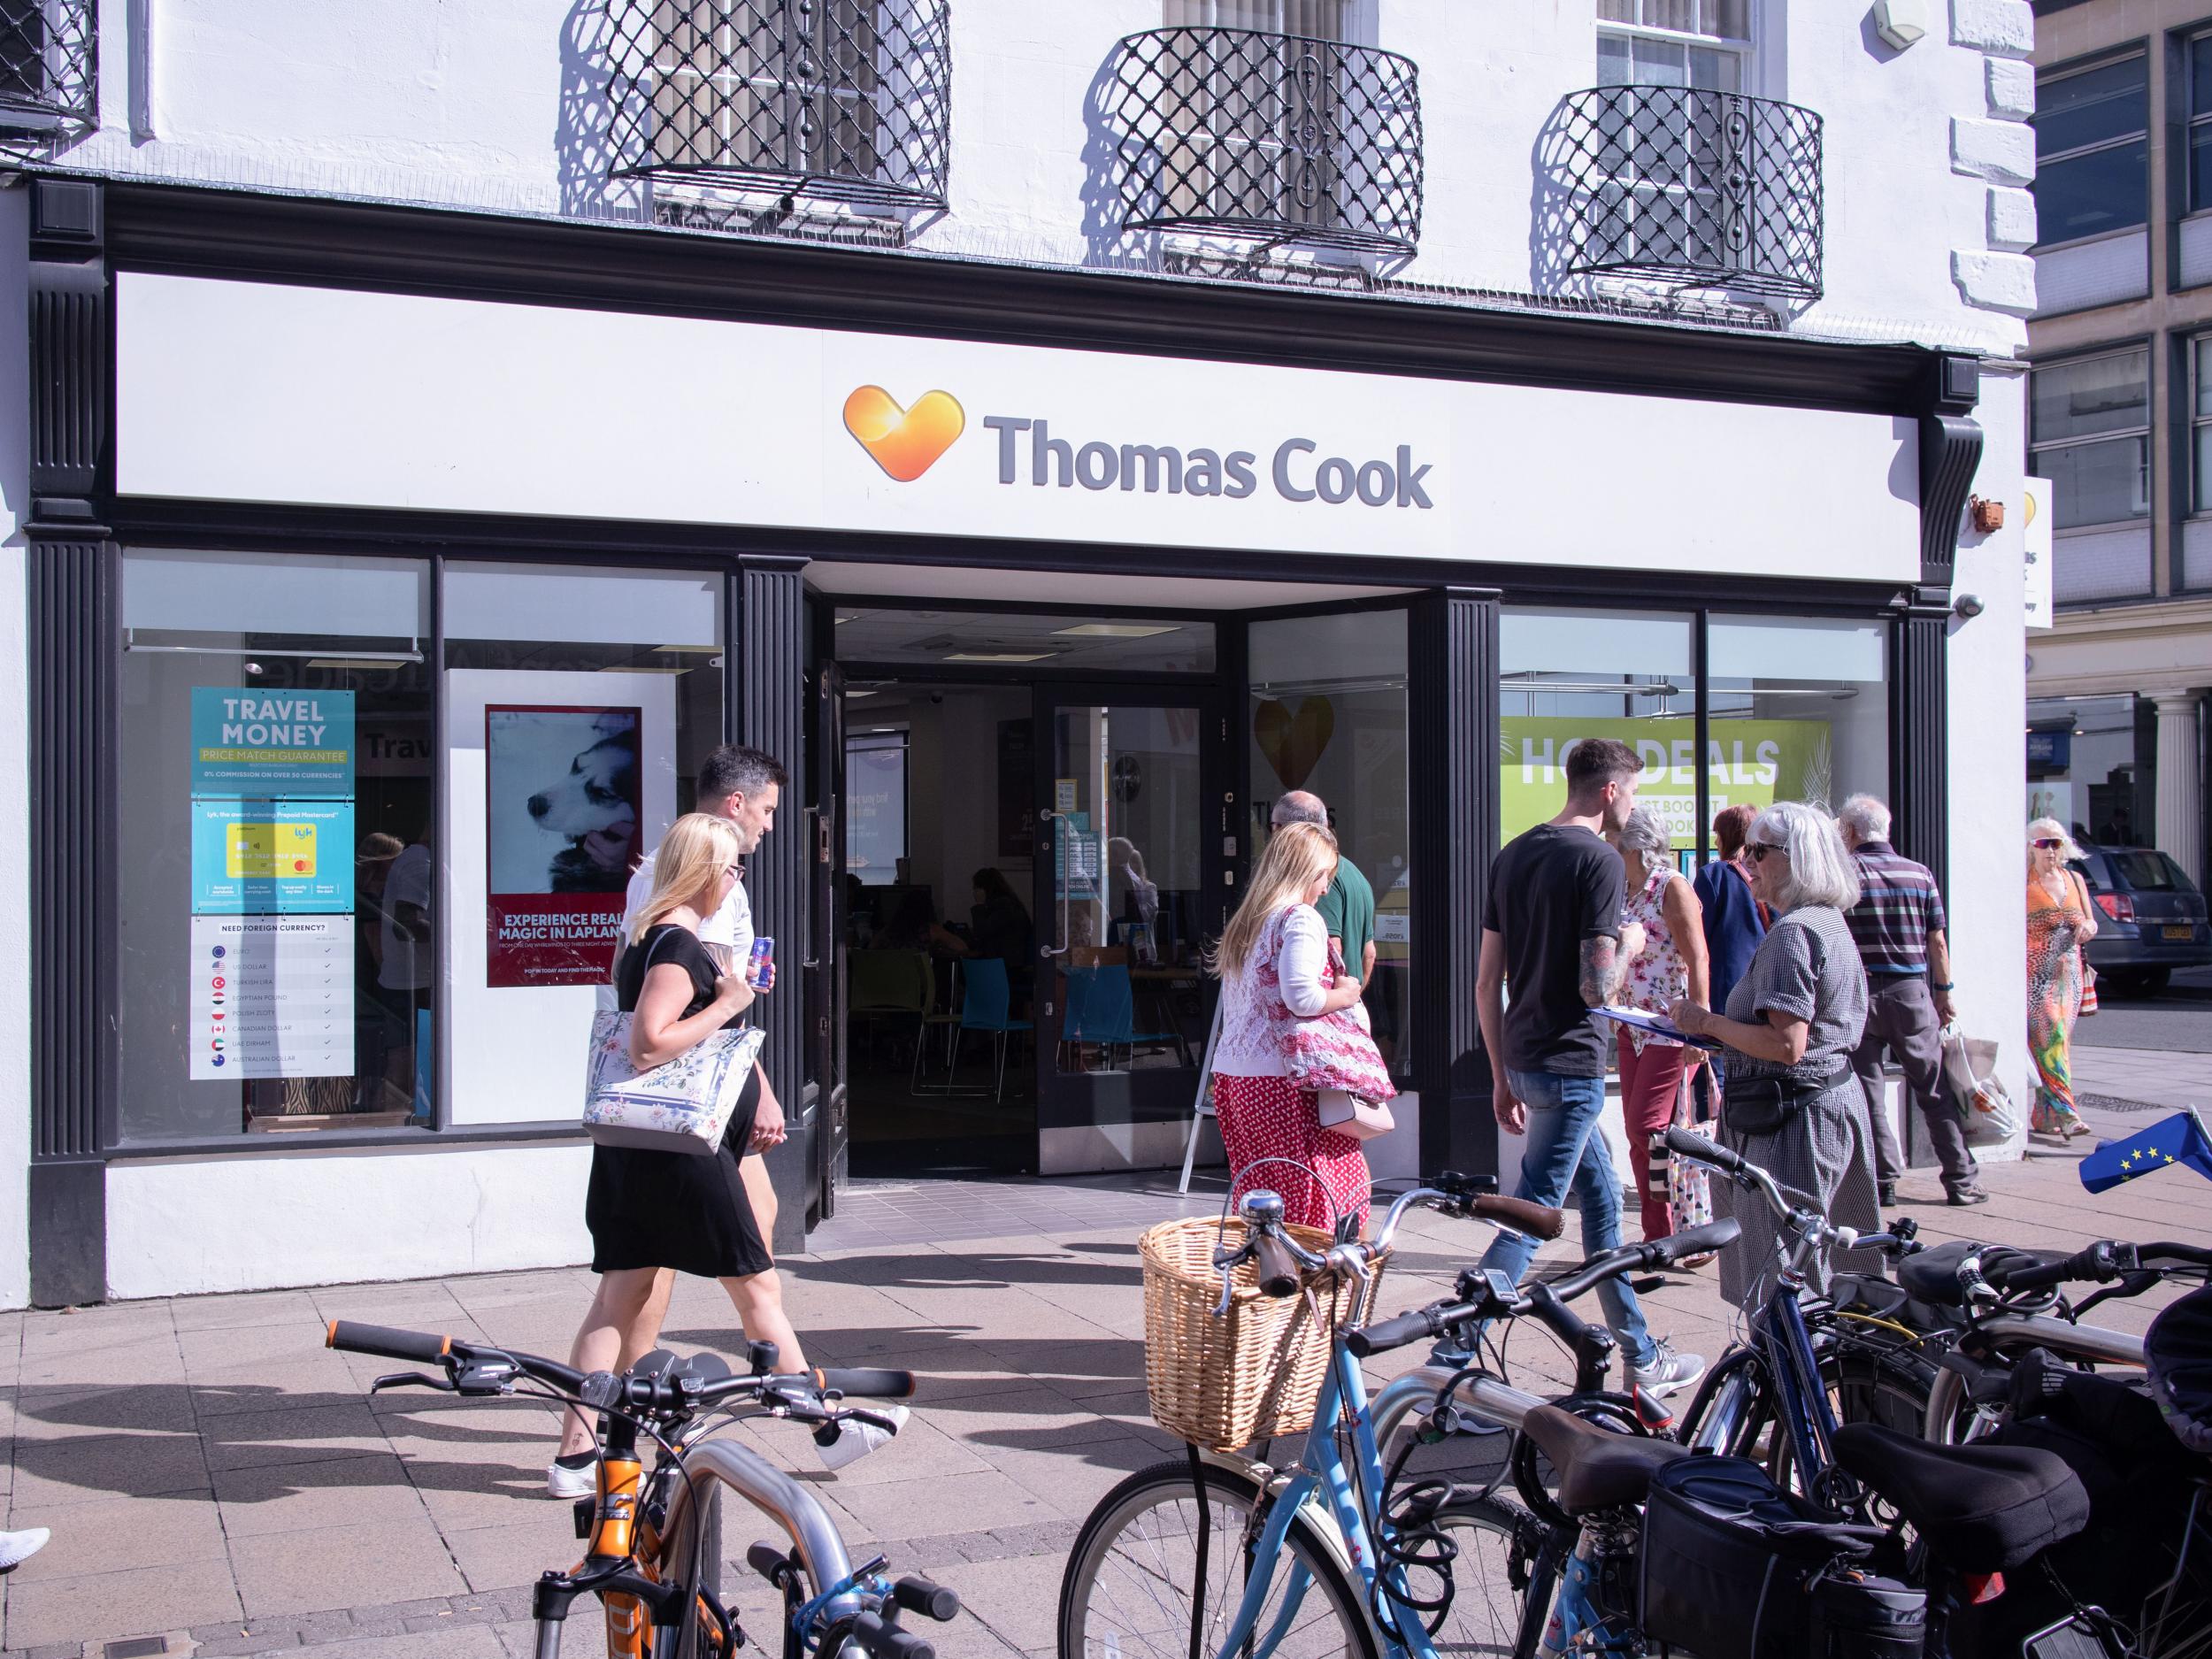 Thomas Cook was one of the last travel agencies to keep stores on the high streets